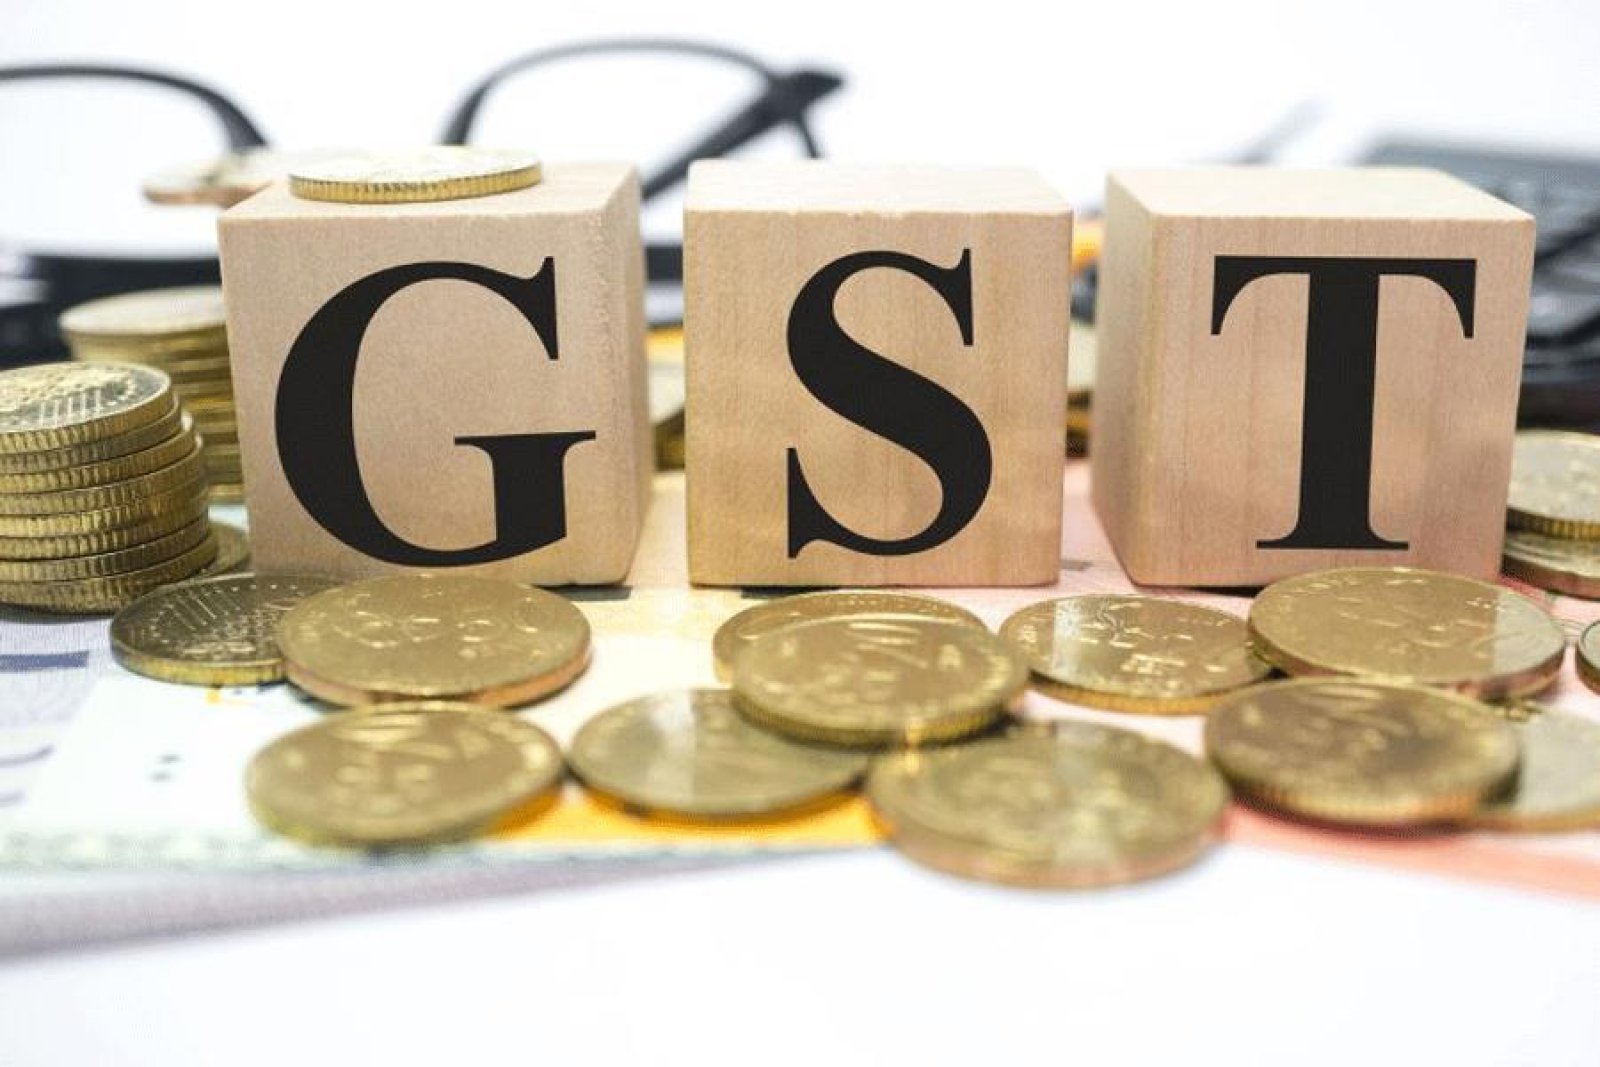 Four arrested for making fake GST bills worth Rs 4716 crore, a network of 178 fake companies were created